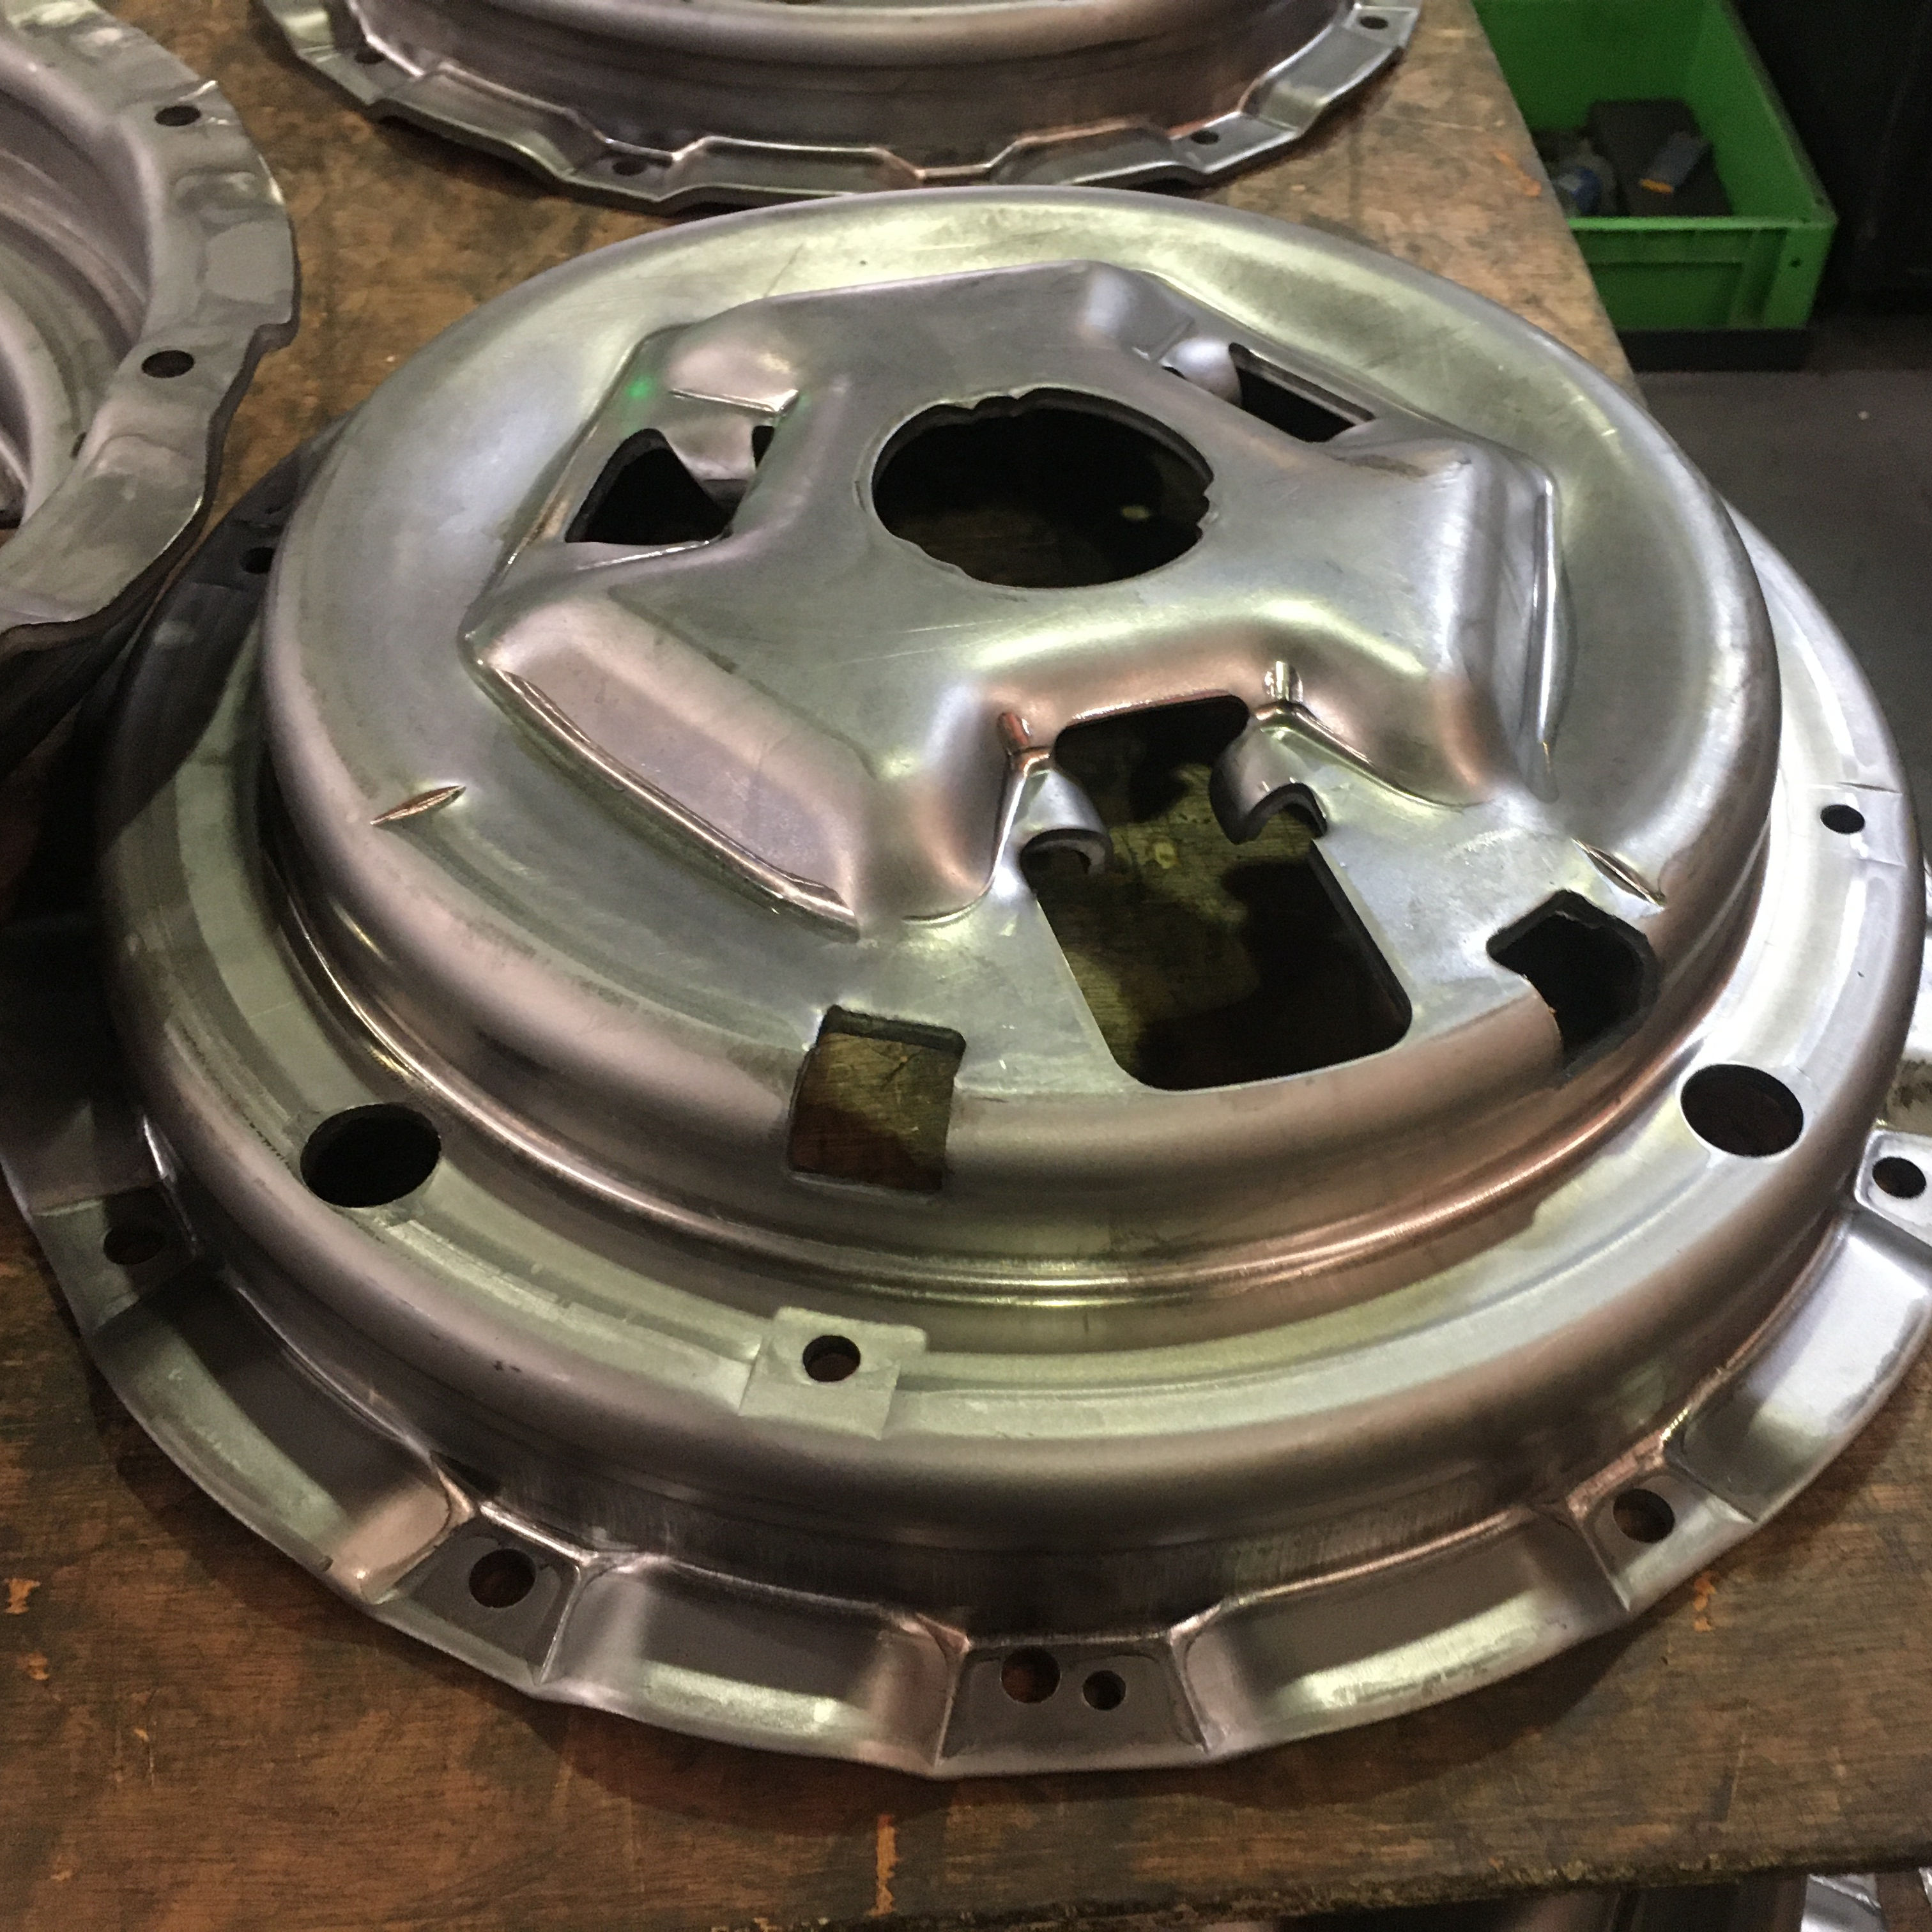 M107237-10 129060-5 125197 128667 128668 14"x1.75"x10 Tow Plates Clutch disc.clutch cover use for mack heavy duty